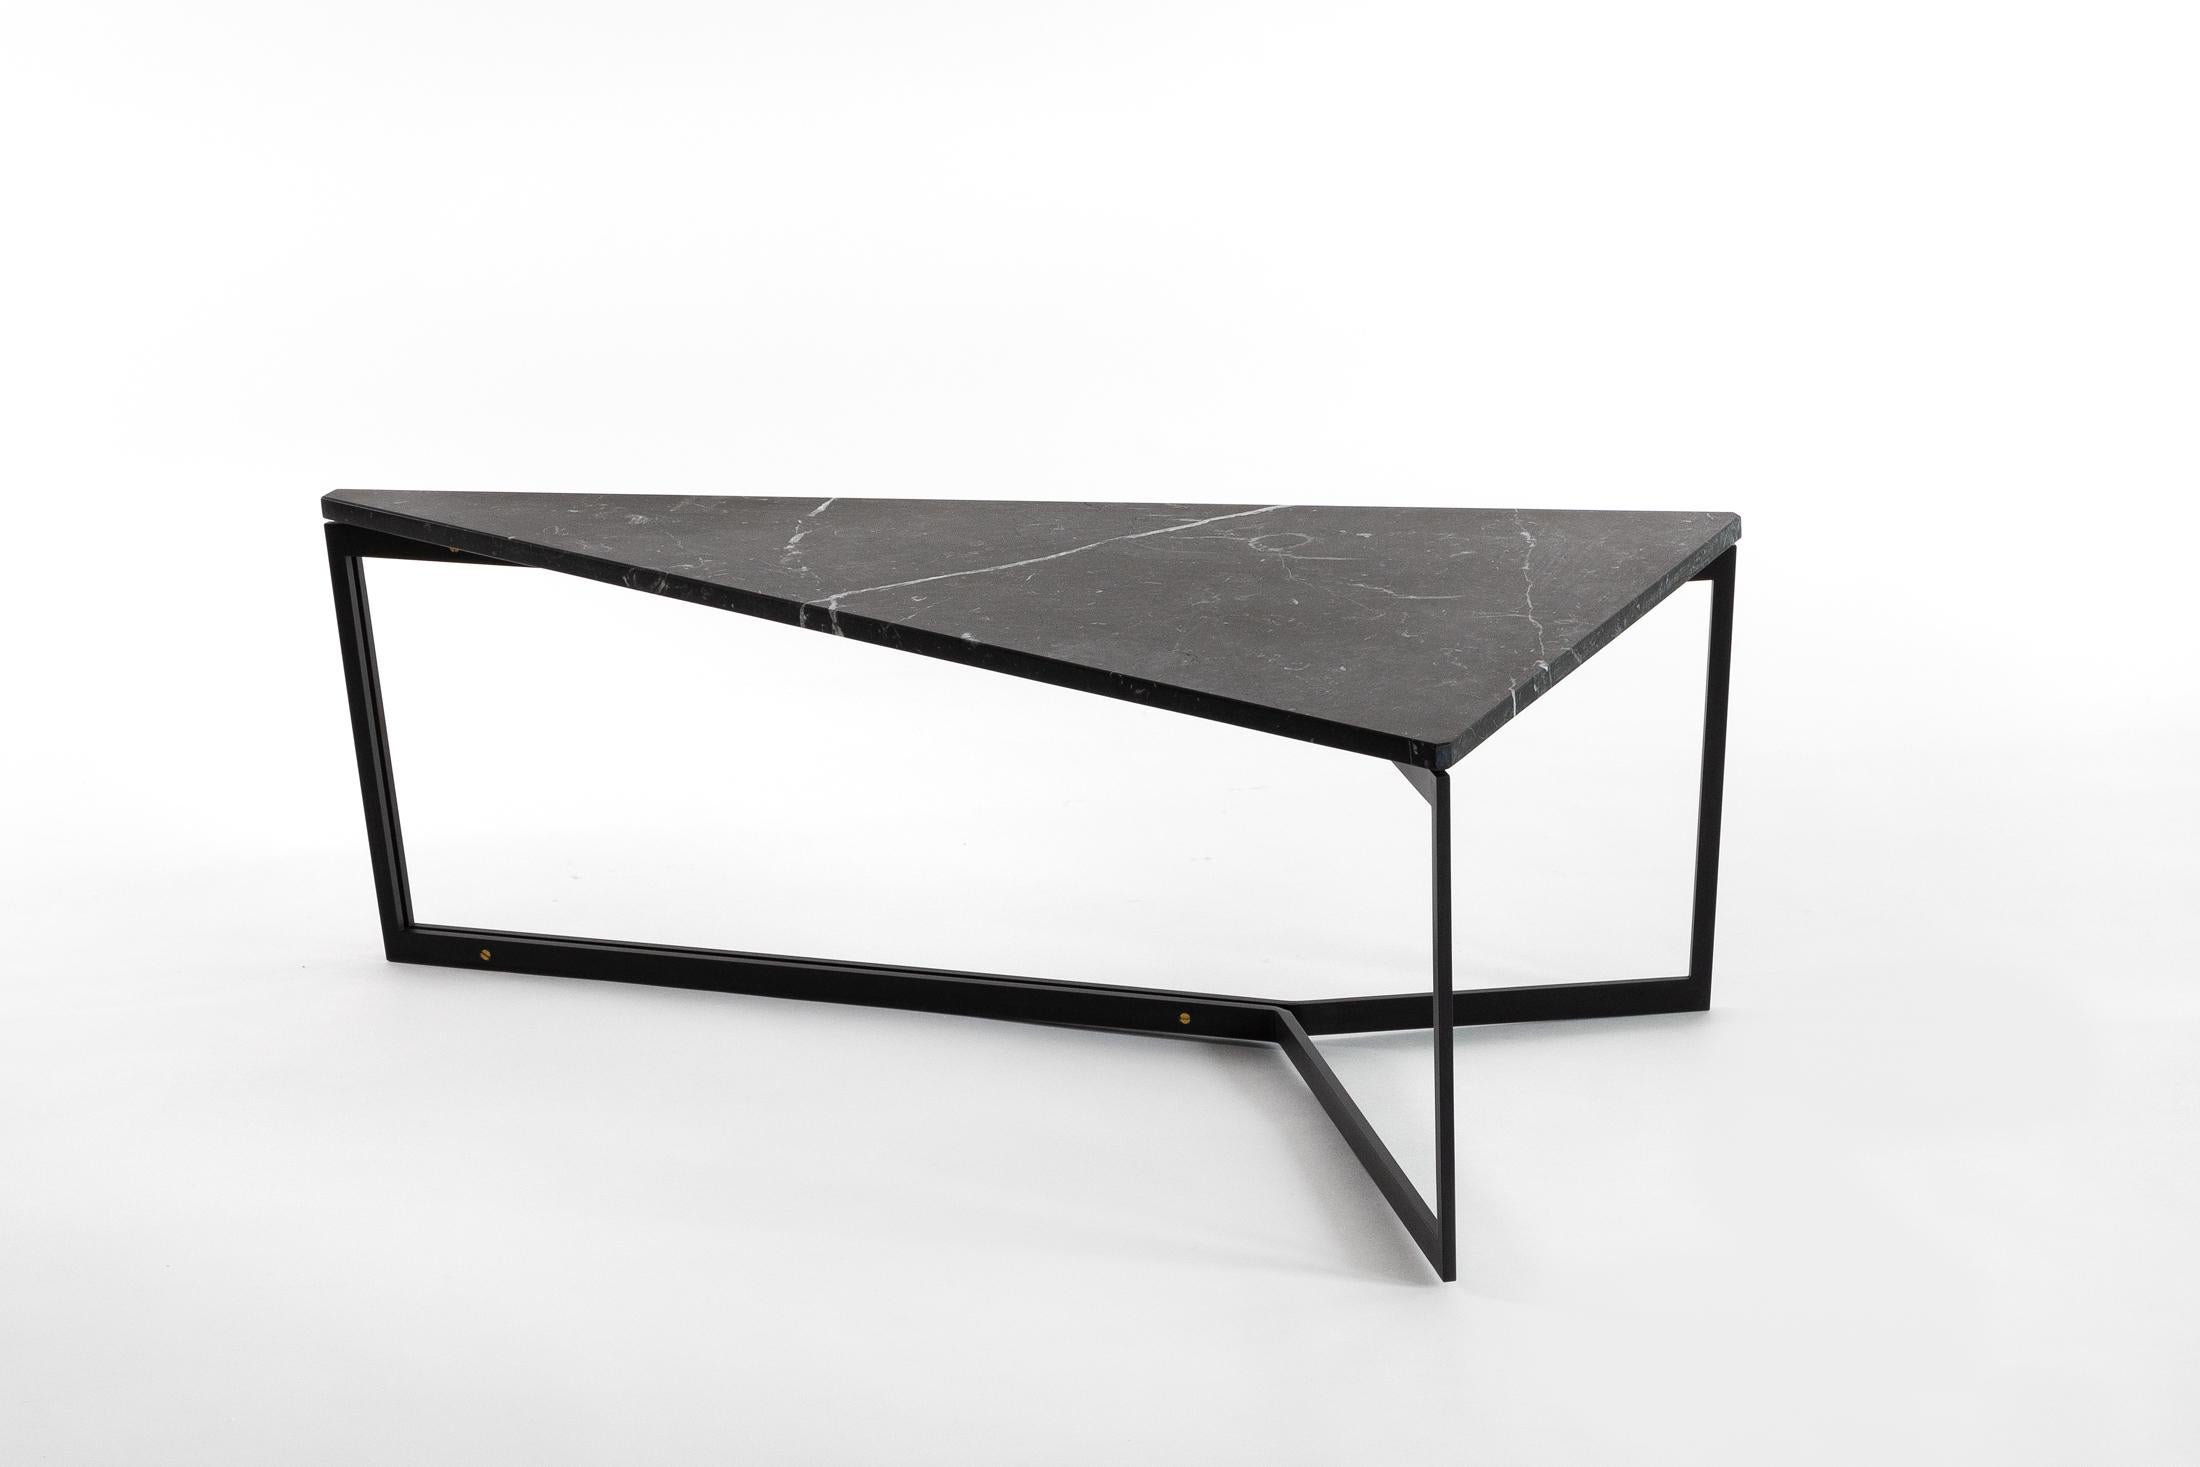 AT14 is a triangular handmade coffee table with a sleek crafted metal base and polished marble or hardwood tabletop

Shown in black marble and blackened cold-rolled steel with bronze accents, and white marble with bronze base. 

Dimensions: 24” L x